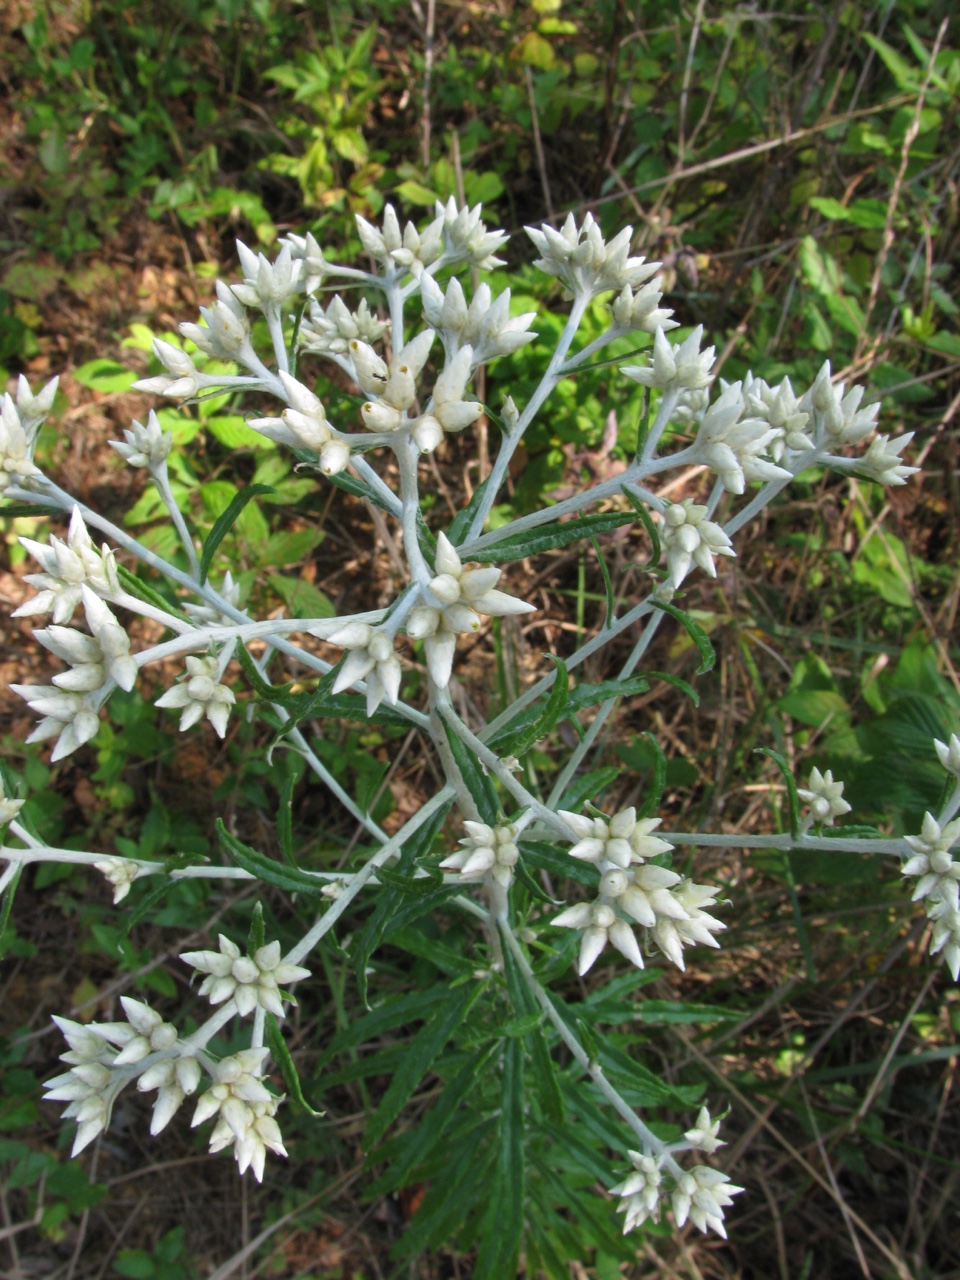 The Scientific Name is Pseudognaphalium obtusifolium [= Gnaphalium obtusifolium]. You will likely hear them called Fragrant Rabbit-tobacco,Rabbit-tobacco, Sweet Everlasting, Old Field Balsam, Eastern Rabbit-tobacco, Fragrant Cudweed. This picture shows the Notice the characteristic white stems of Pseudognaphalium obtusifolium [= Gnaphalium obtusifolium]